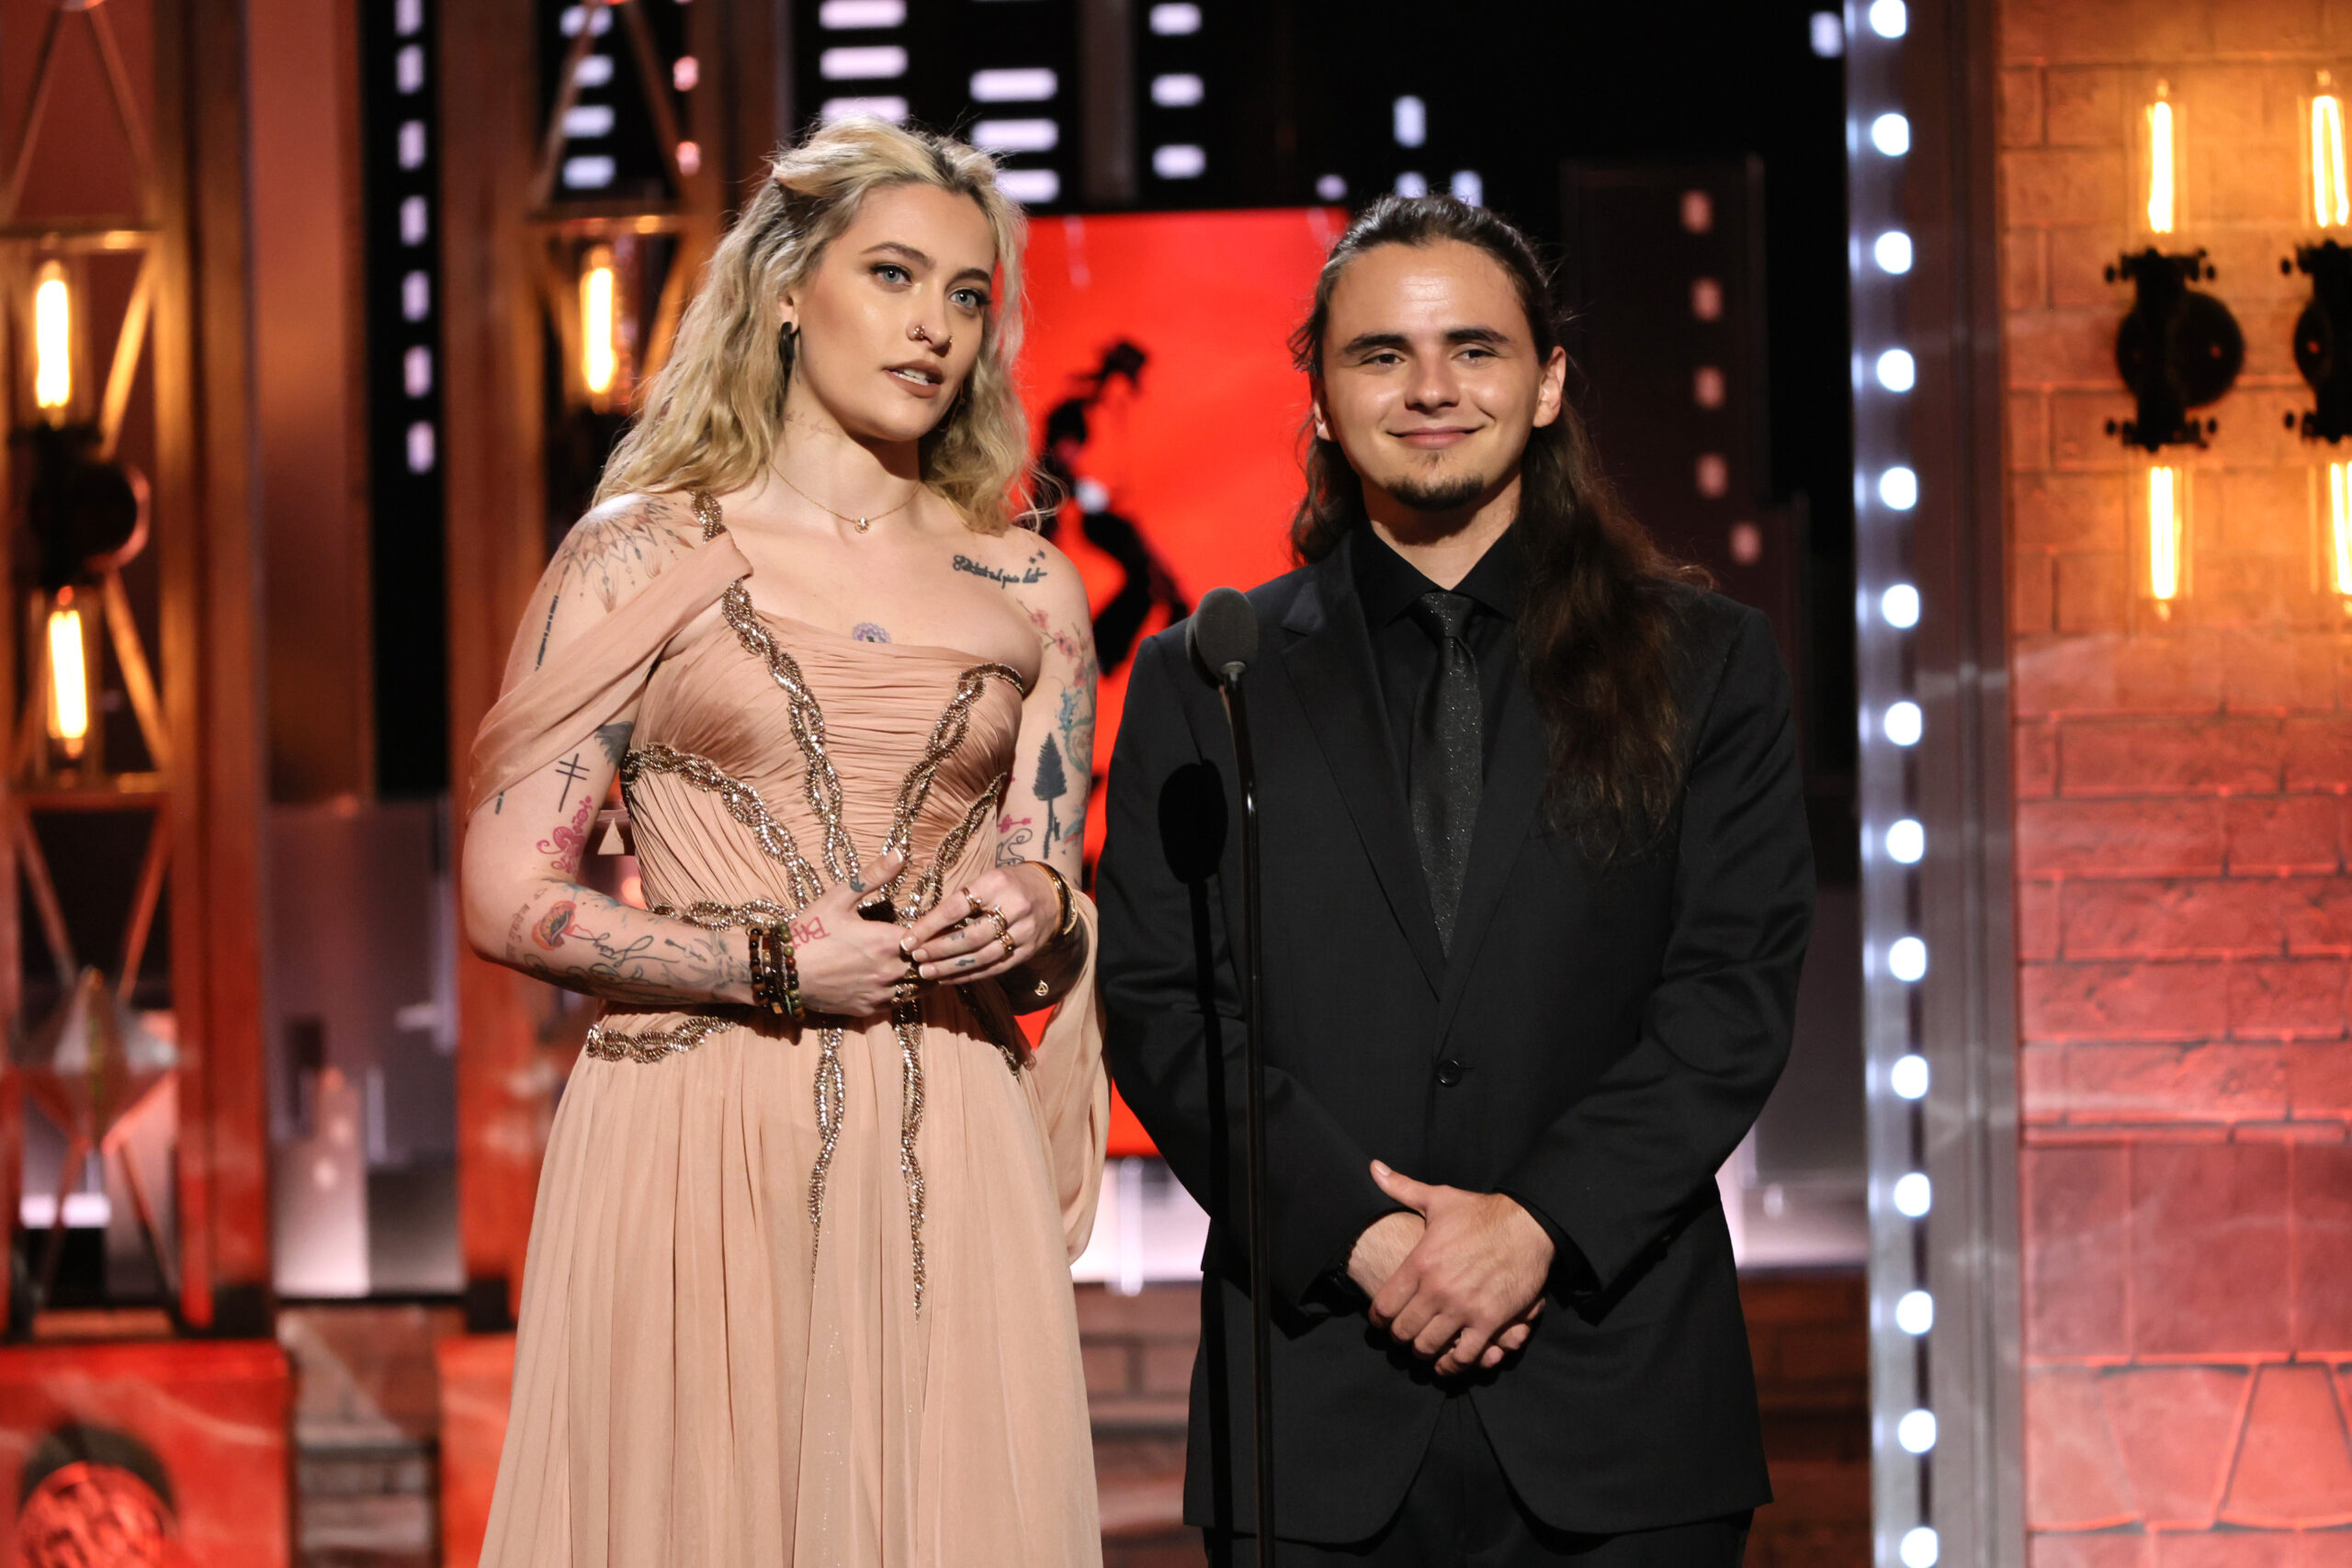 NEW YORK, NEW YORK - JUNE 12: Paris Jackson and Prince Jackson speak onstage at the 75th Annual Tony Awards at Radio City Music Hall on June 12, 2022 in New York City. (Photo by Theo Wargo/Getty Images for Tony Awards Productions)